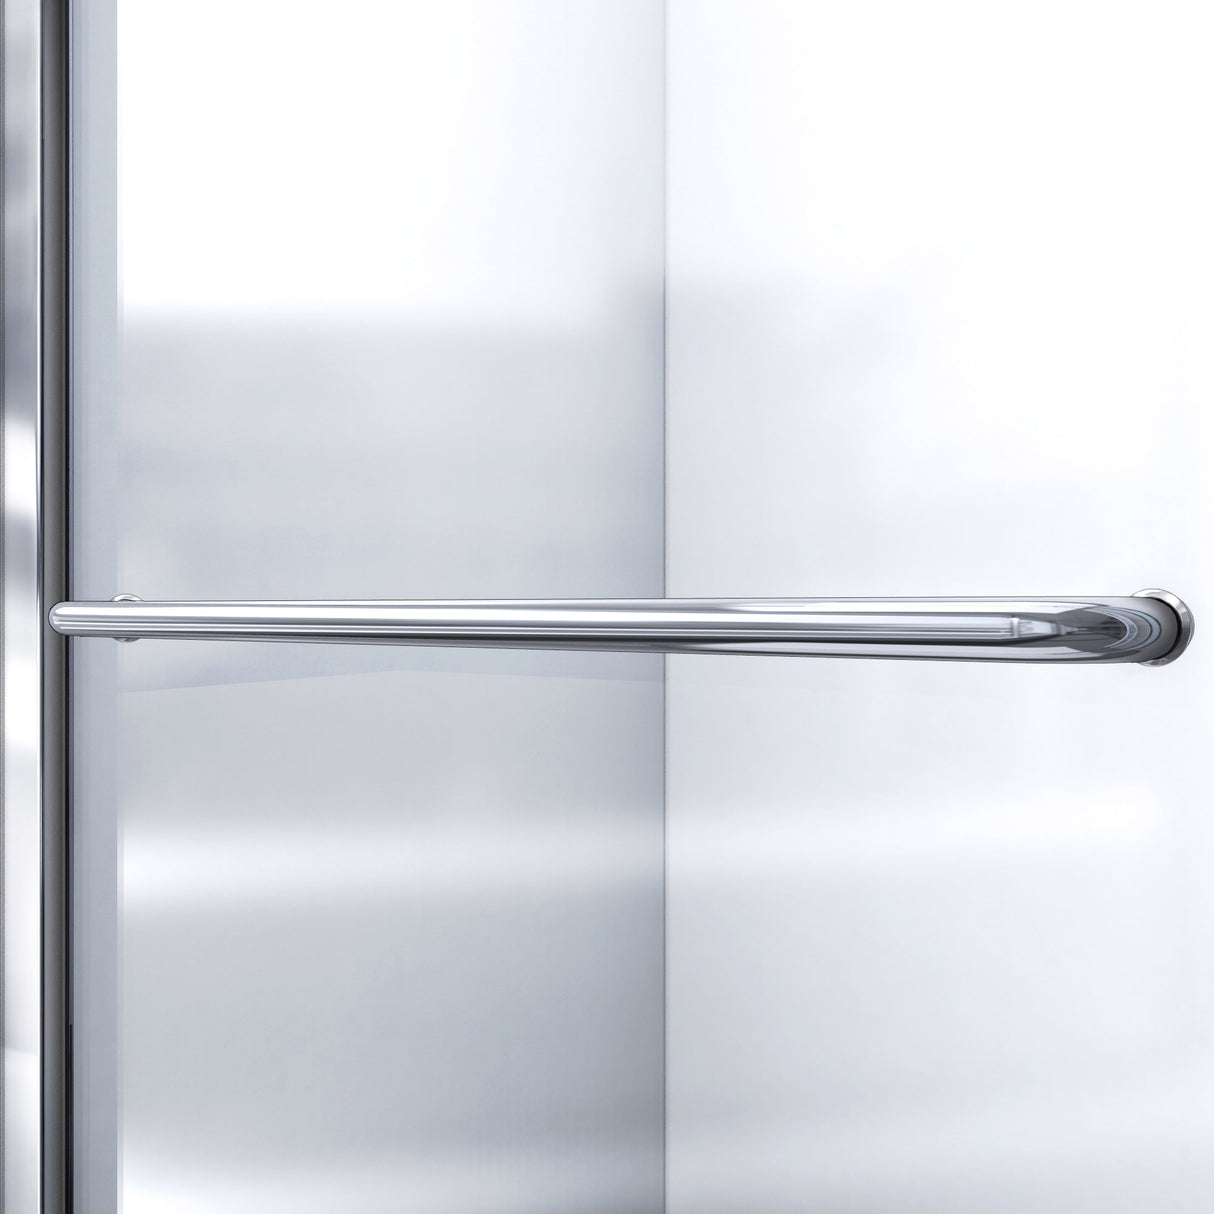 DreamLine Infinity-Z 34 in. D x 60 in. W x 74 3/4 in. H Frosted Sliding Shower Door in Brushed Nickel and Right Drain Biscuit Base